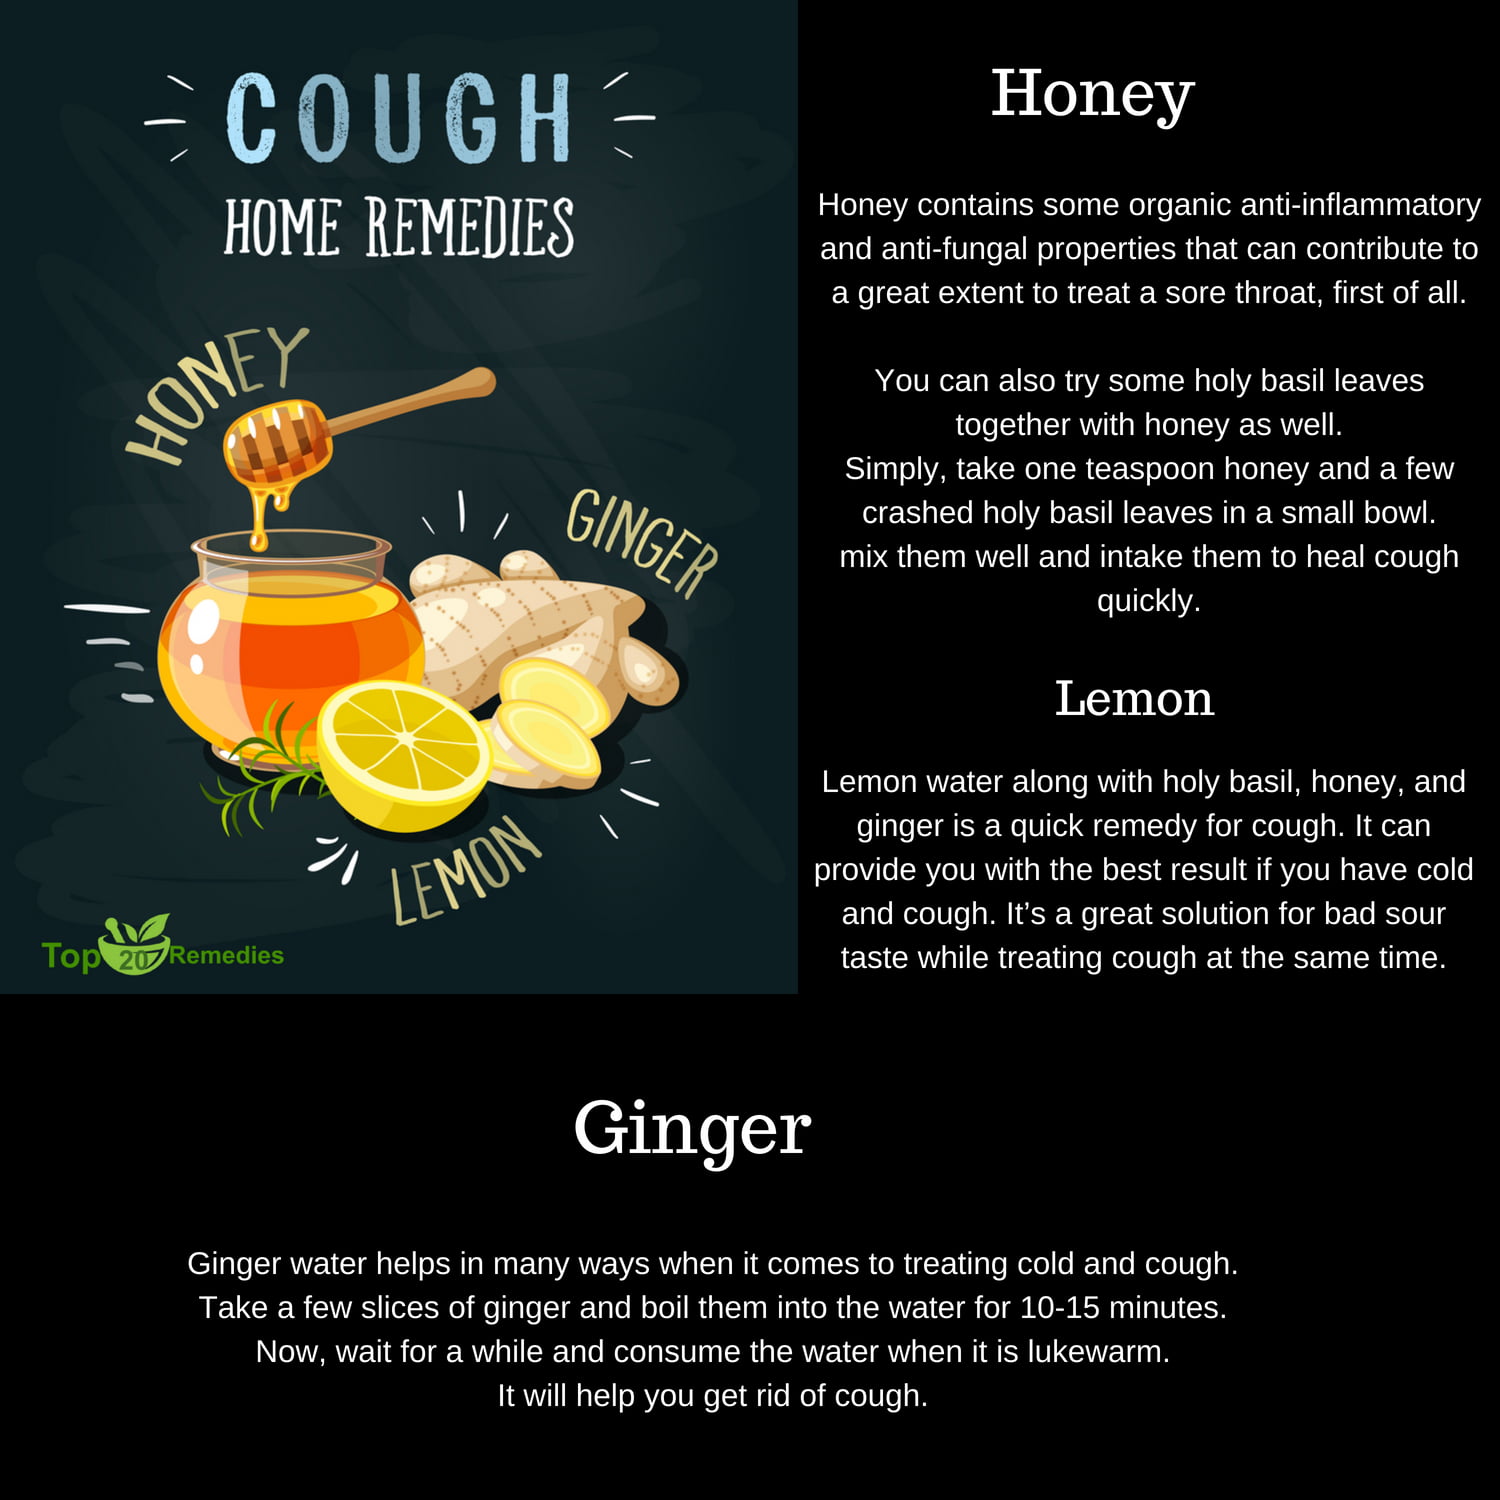 Effective home remedies for cough and phlegm